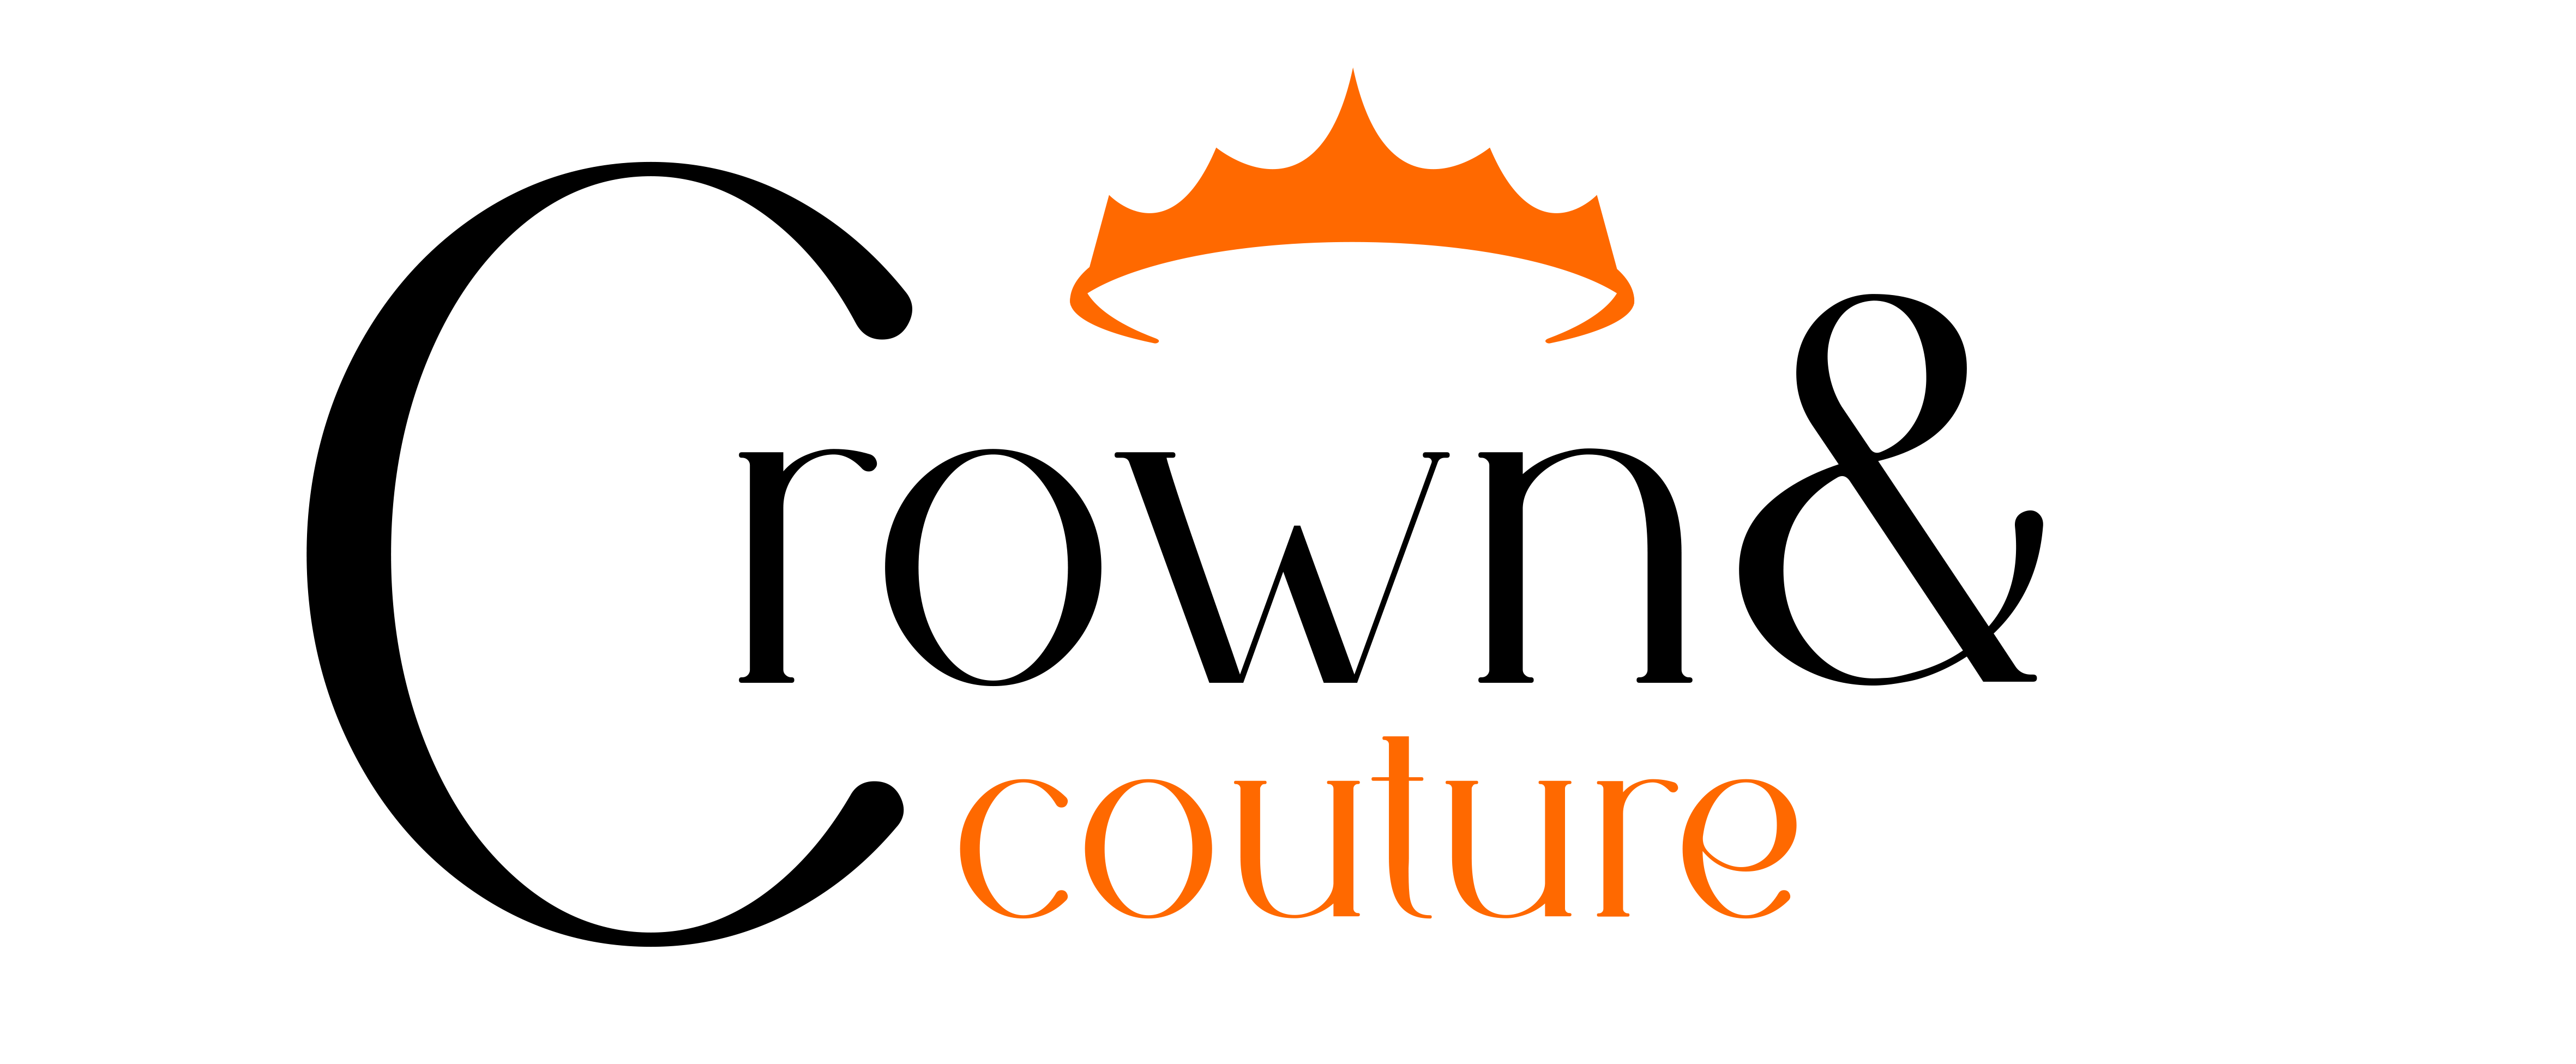 CrownAndCouture